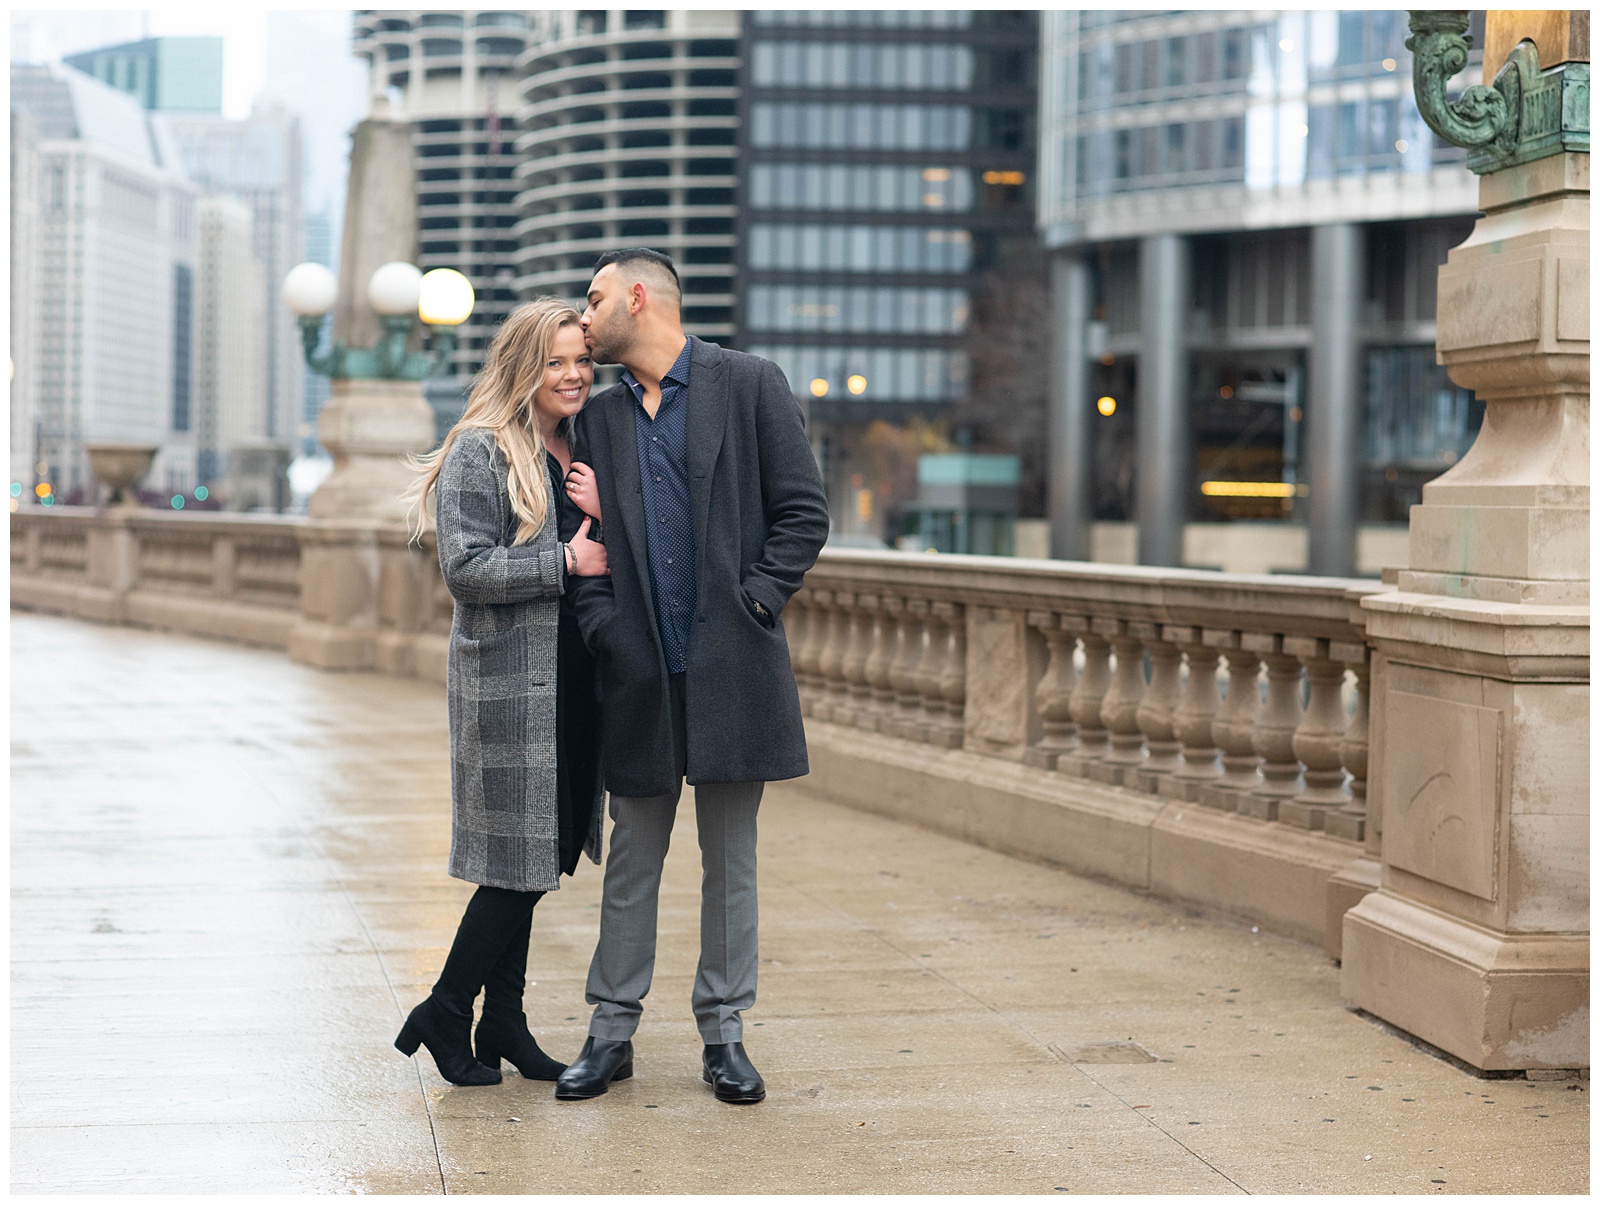 Proposing at Chicago's London House with Chicago Wedding Photographer Sarah Sunstrom Photography